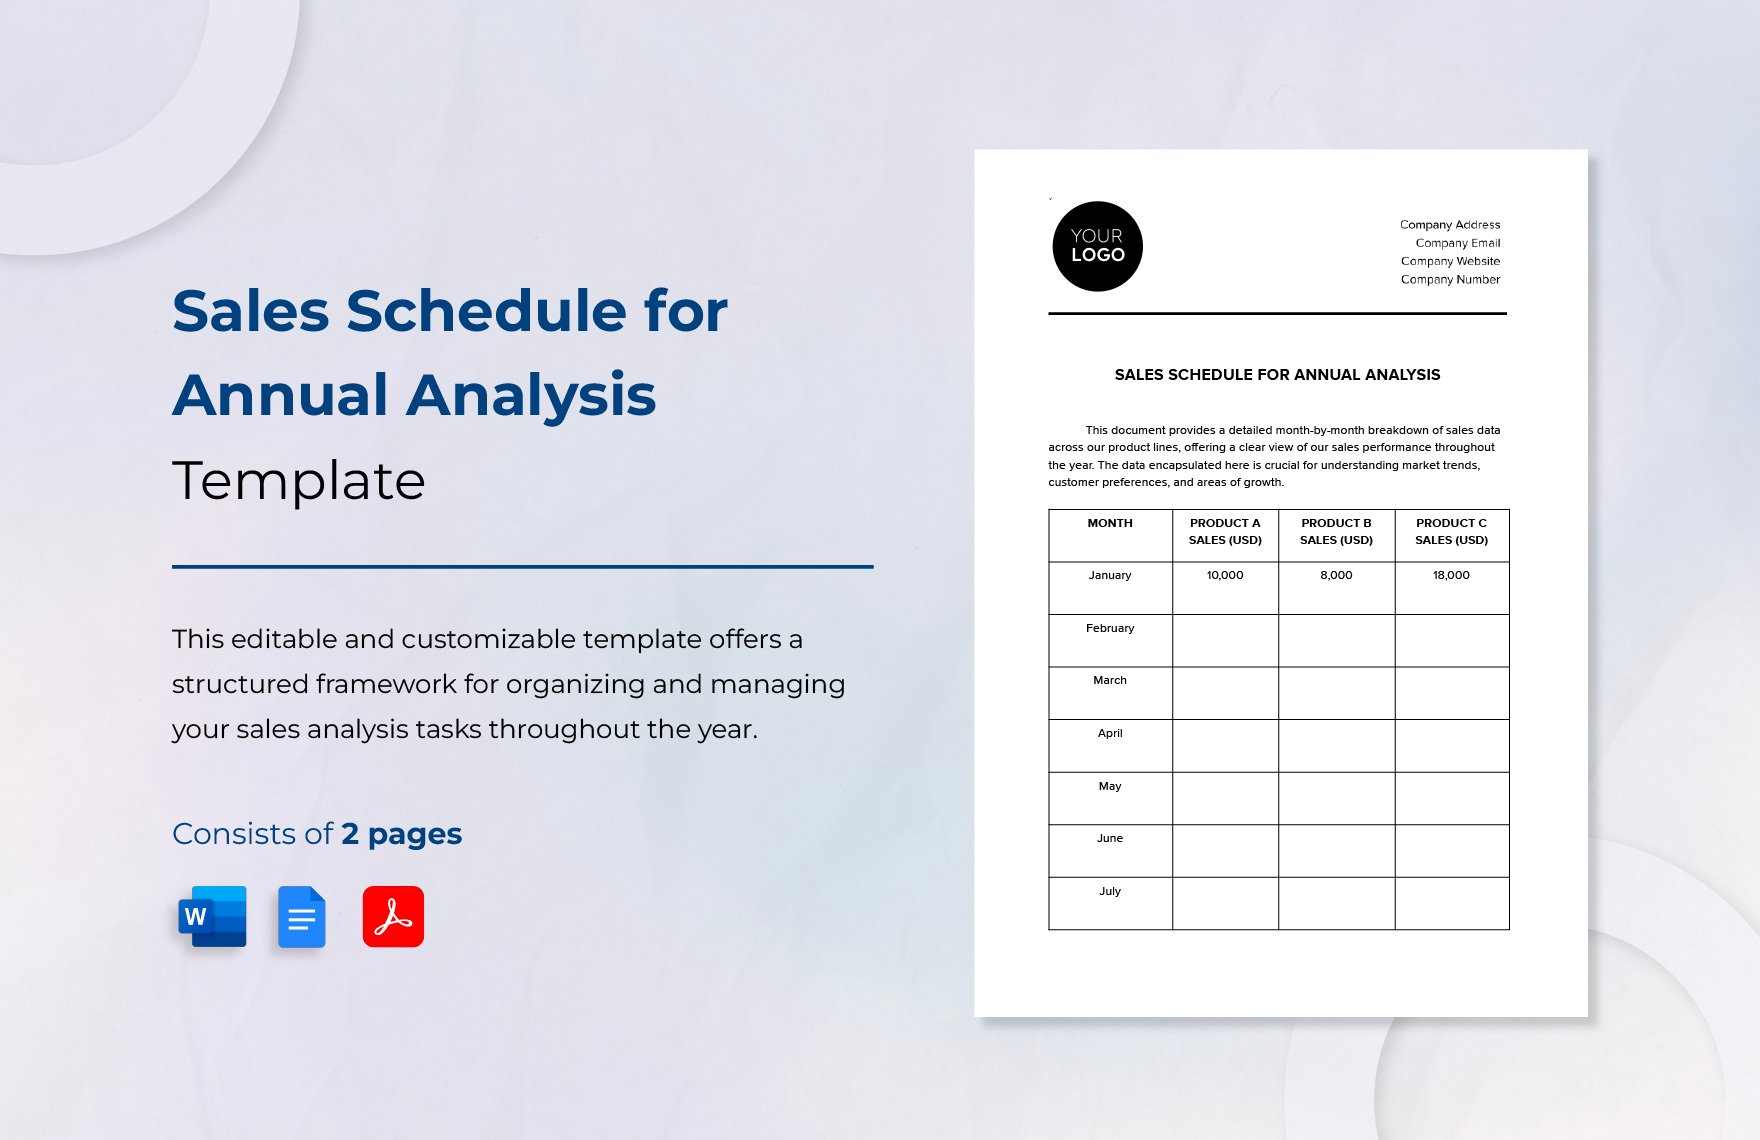 Sales Schedule for Annual Analysis Template